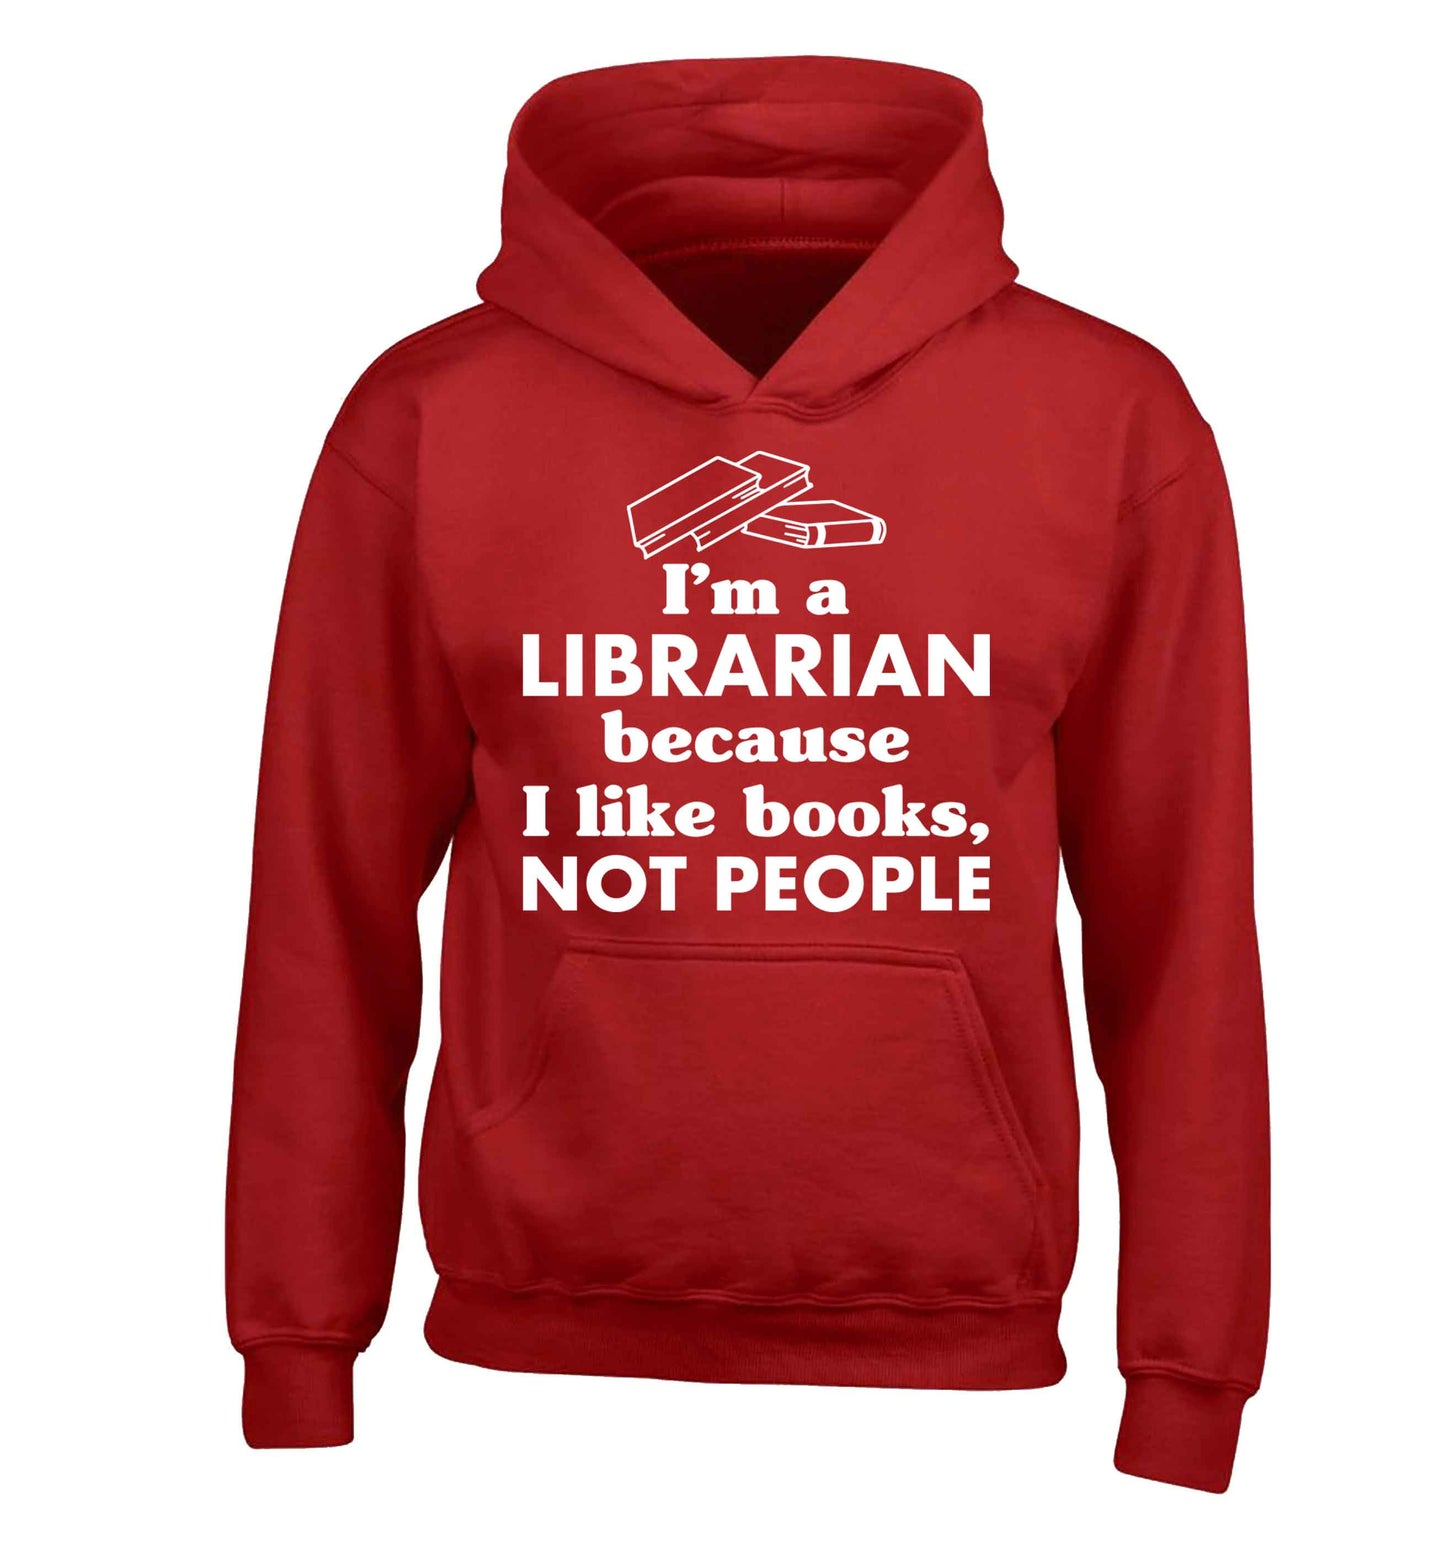 I'm a librarian because I like books not people children's red hoodie 12-13 Years